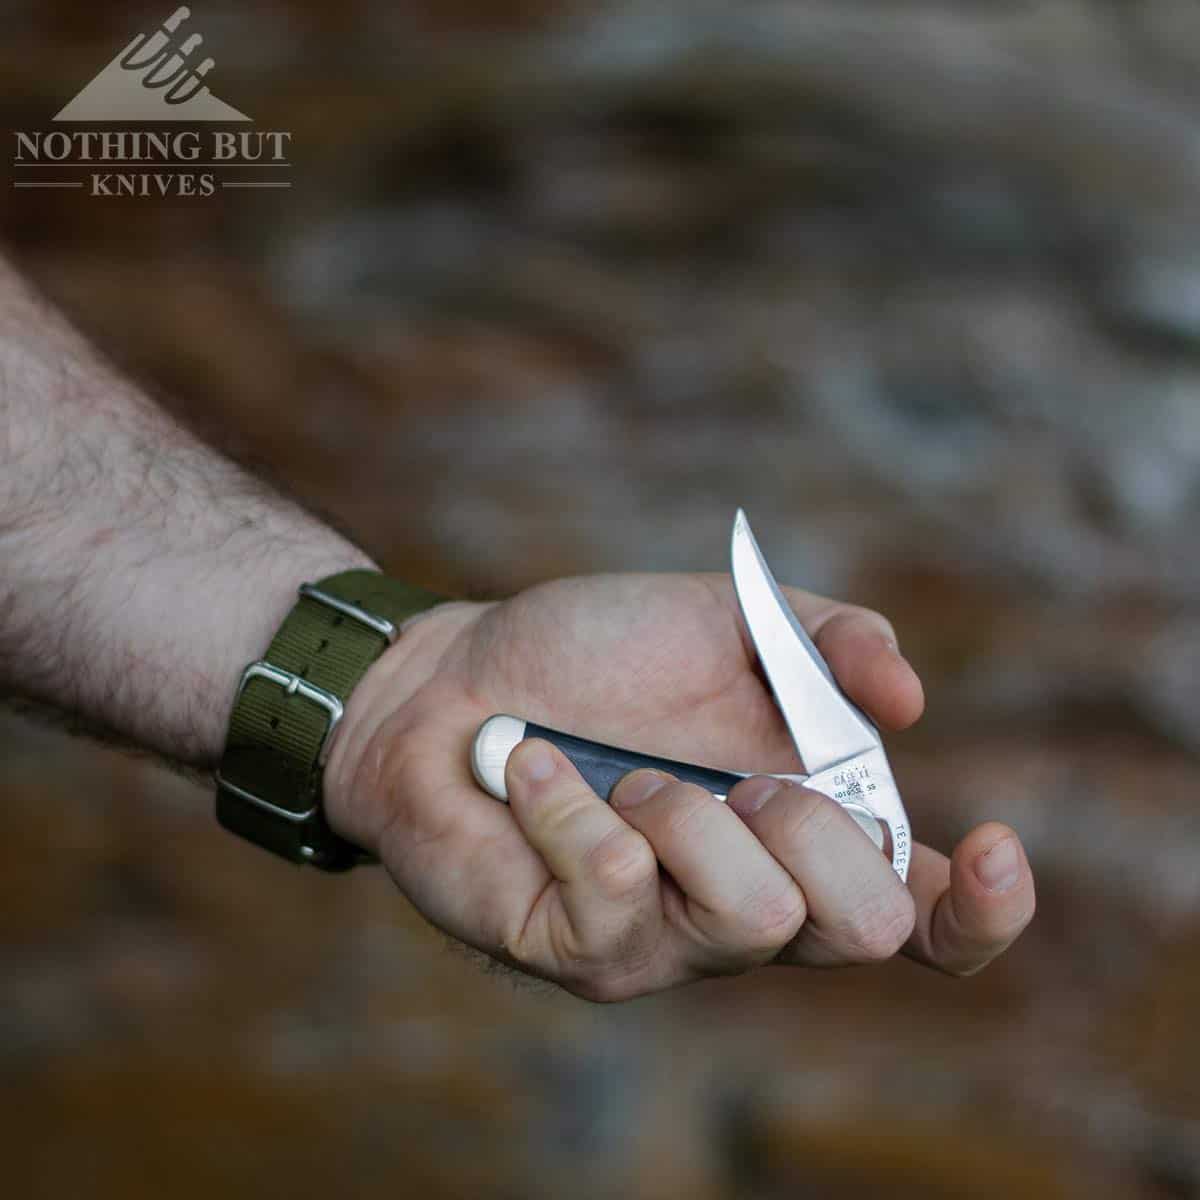 Testing the action on the Case RussLock folding knife.